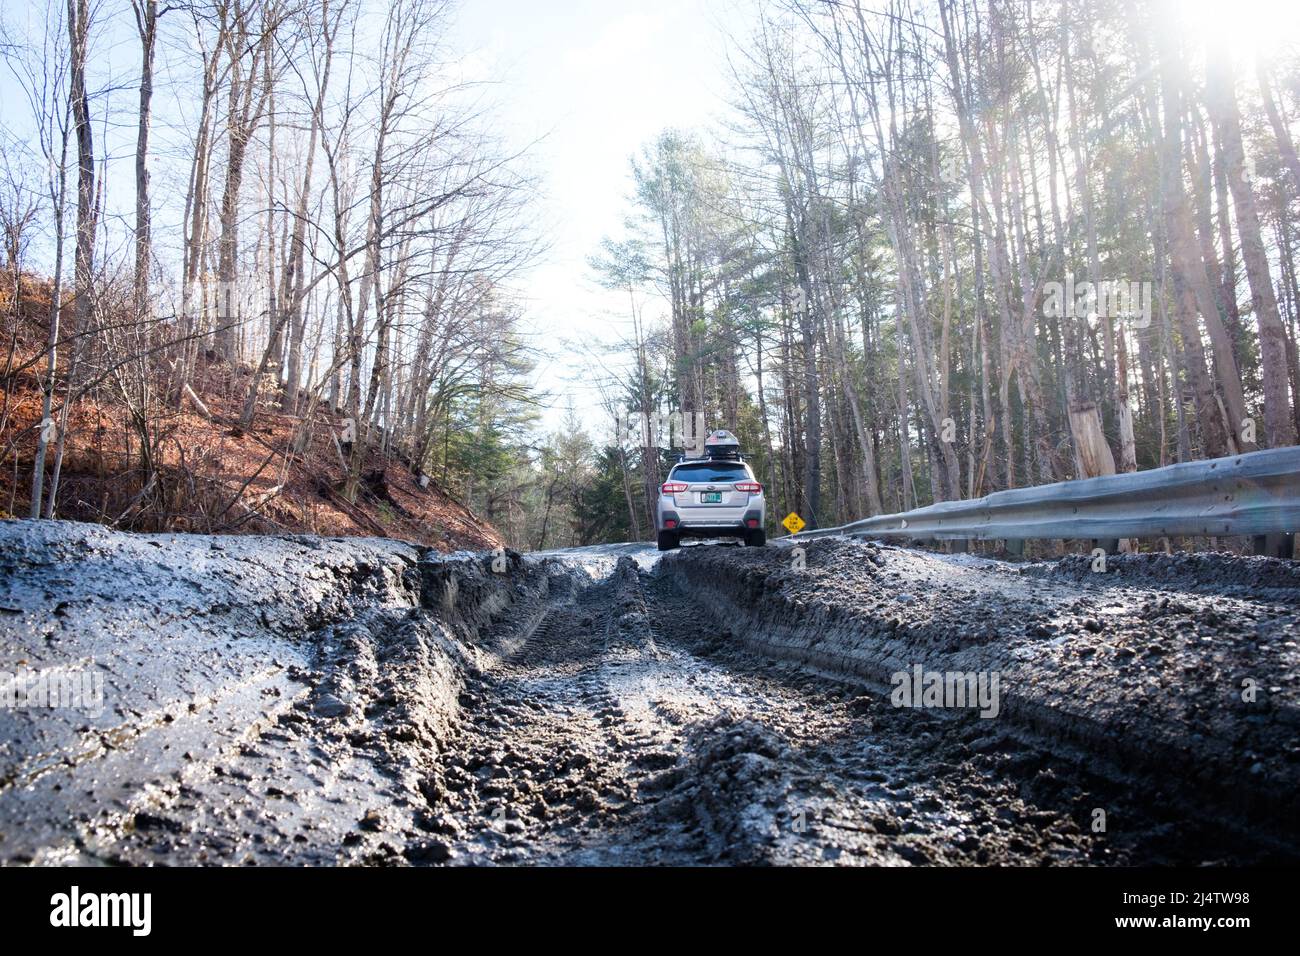 Mud Season, the descent of Vermont dirt roads into mud bogs, happens every spring, usually in March and April. State of Vermont, USA. Stock Photo